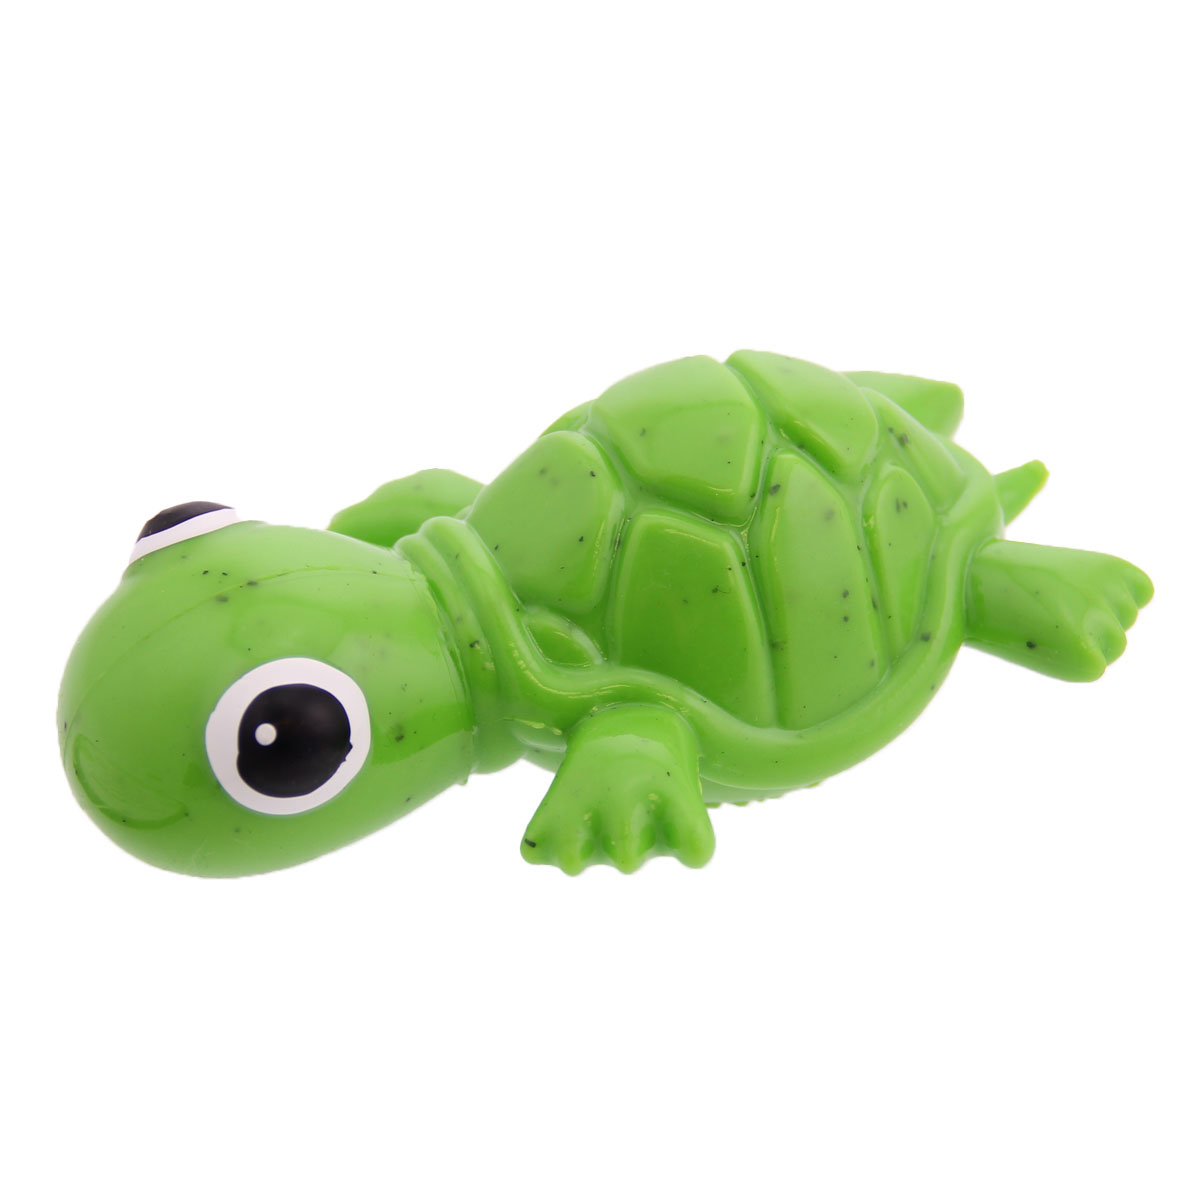 Cycle Dog 3-Play Turtle Dog Toy - Green